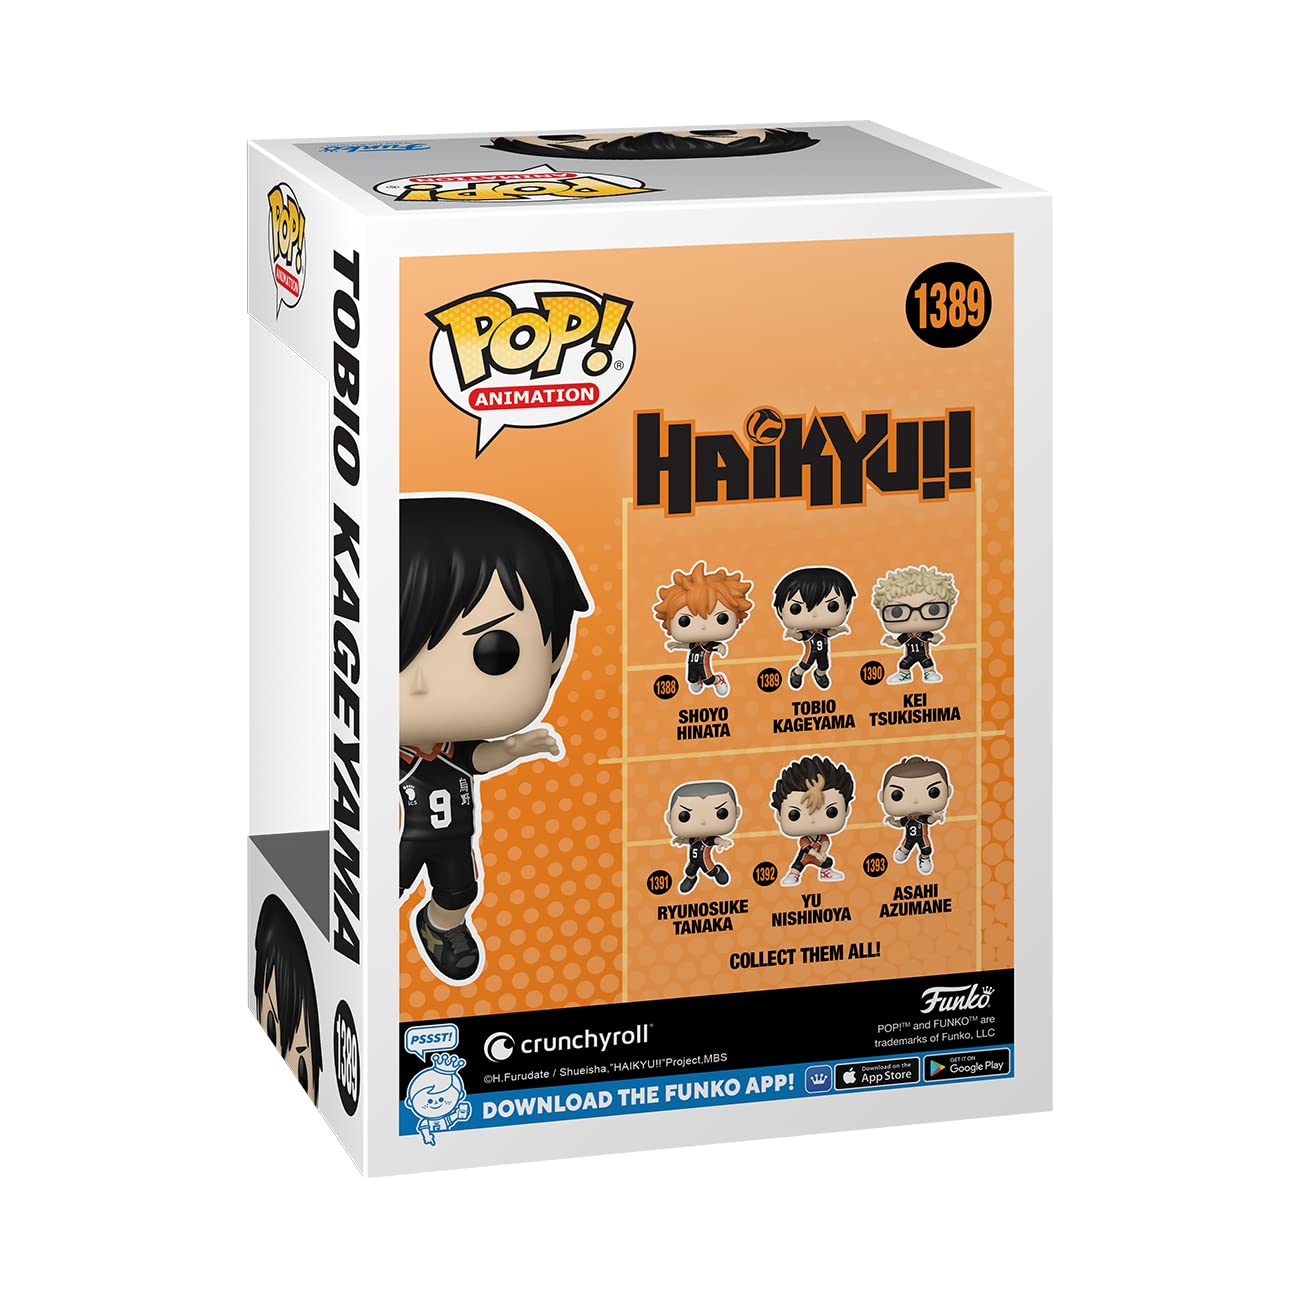 Funko POP! Animation: Haikyu - Kageyama - Haikyu! - Collectable Vinyl Figure - Gift Idea - Official Merchandise - Toys for Kids & Adults - Anime Fans - Model Figure for Collectors and Display